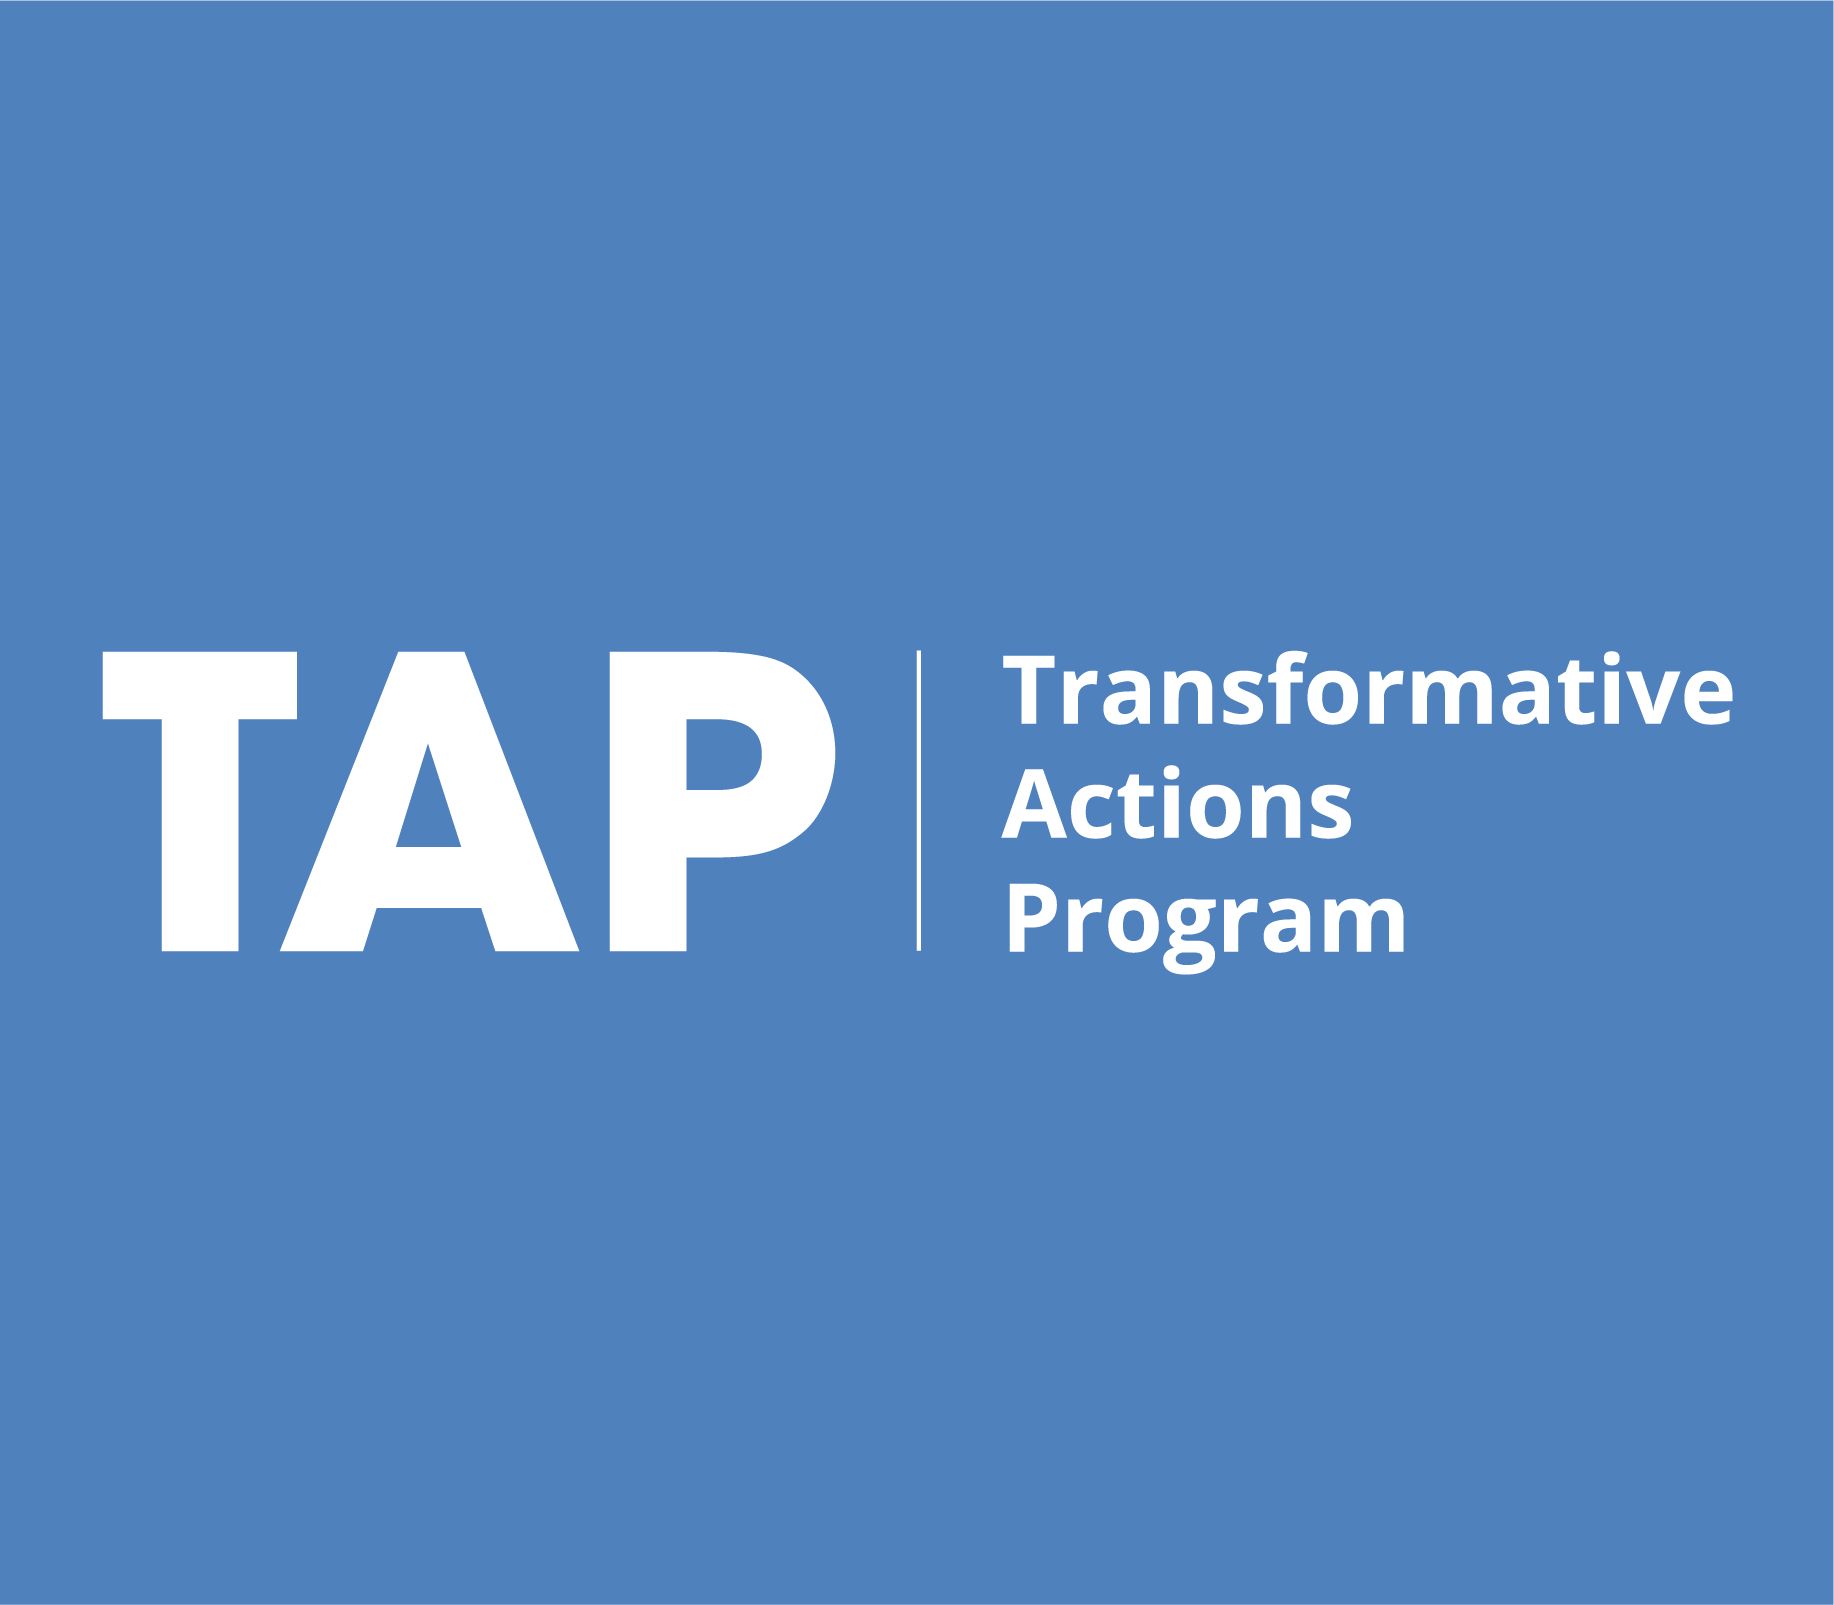 The Transformative Actions Program (TAP)